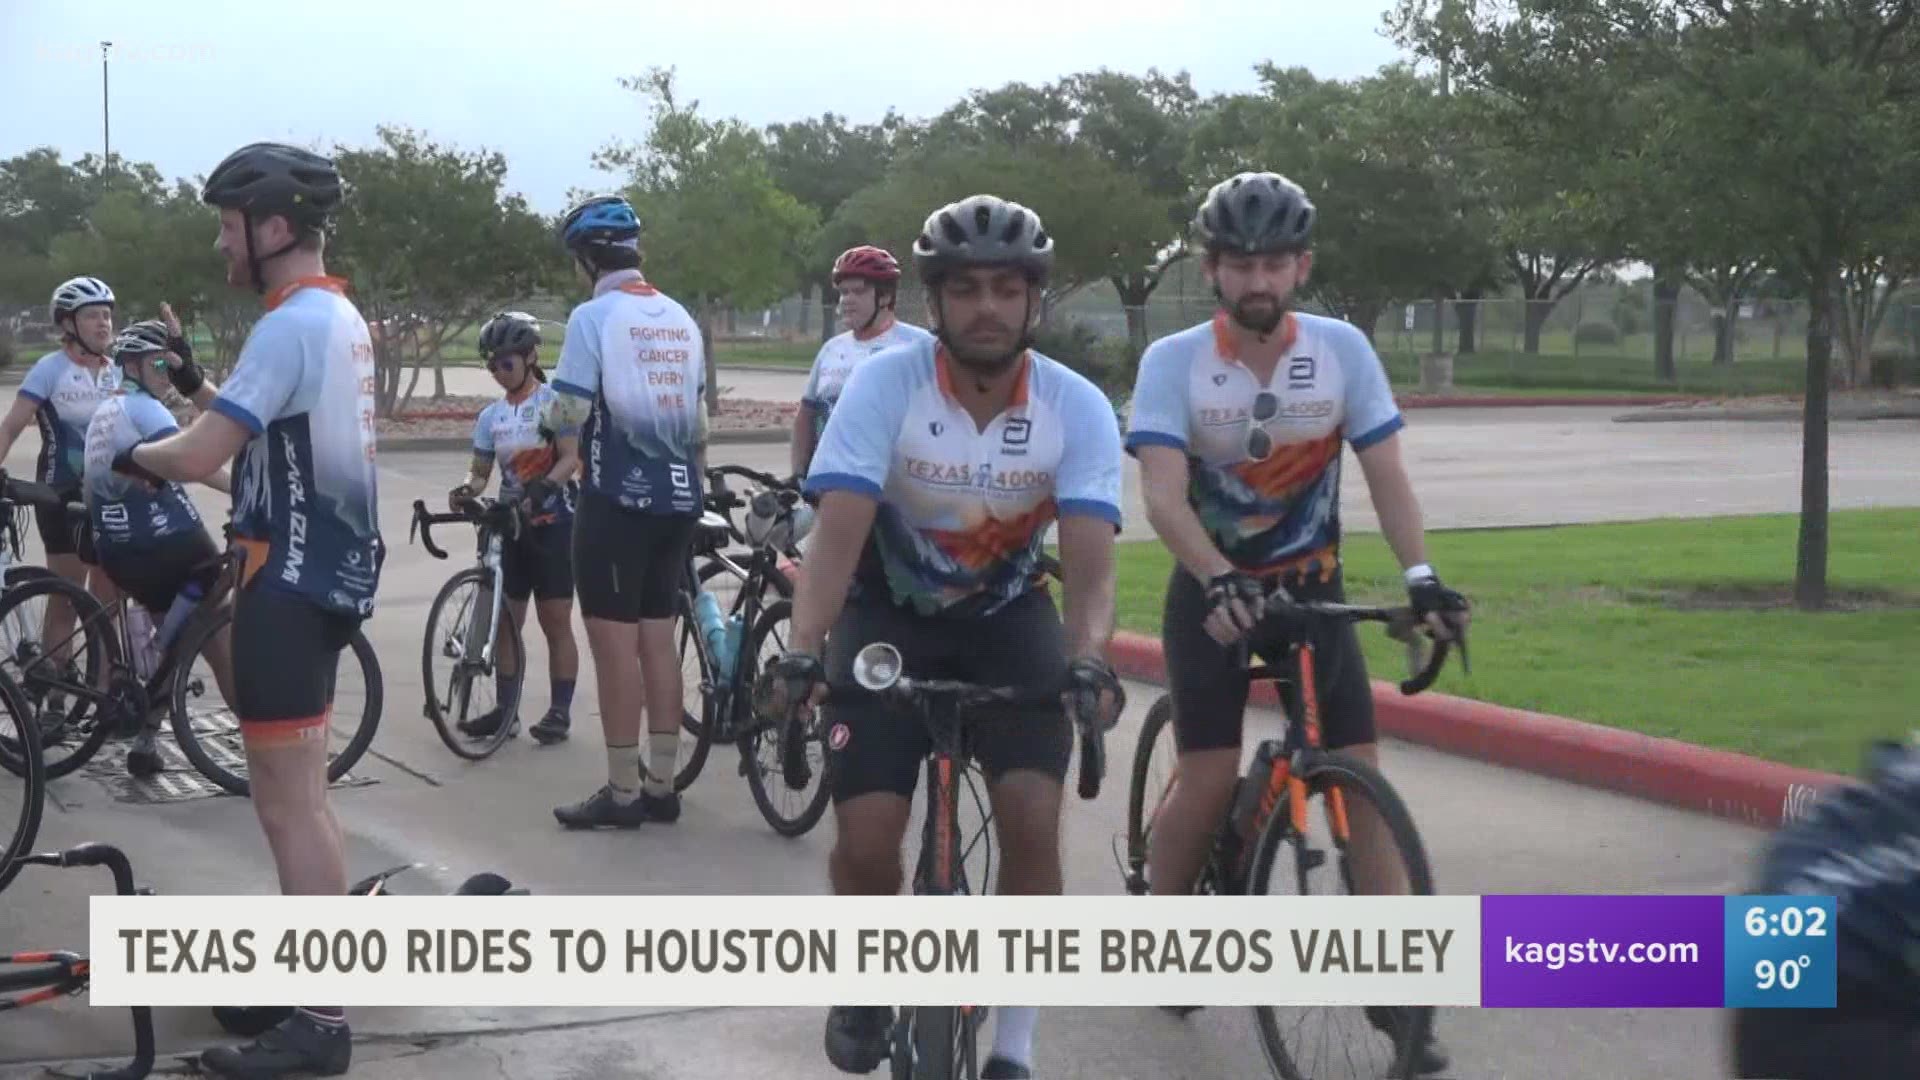 The Austin based group has participated in a bike across the country since 2004